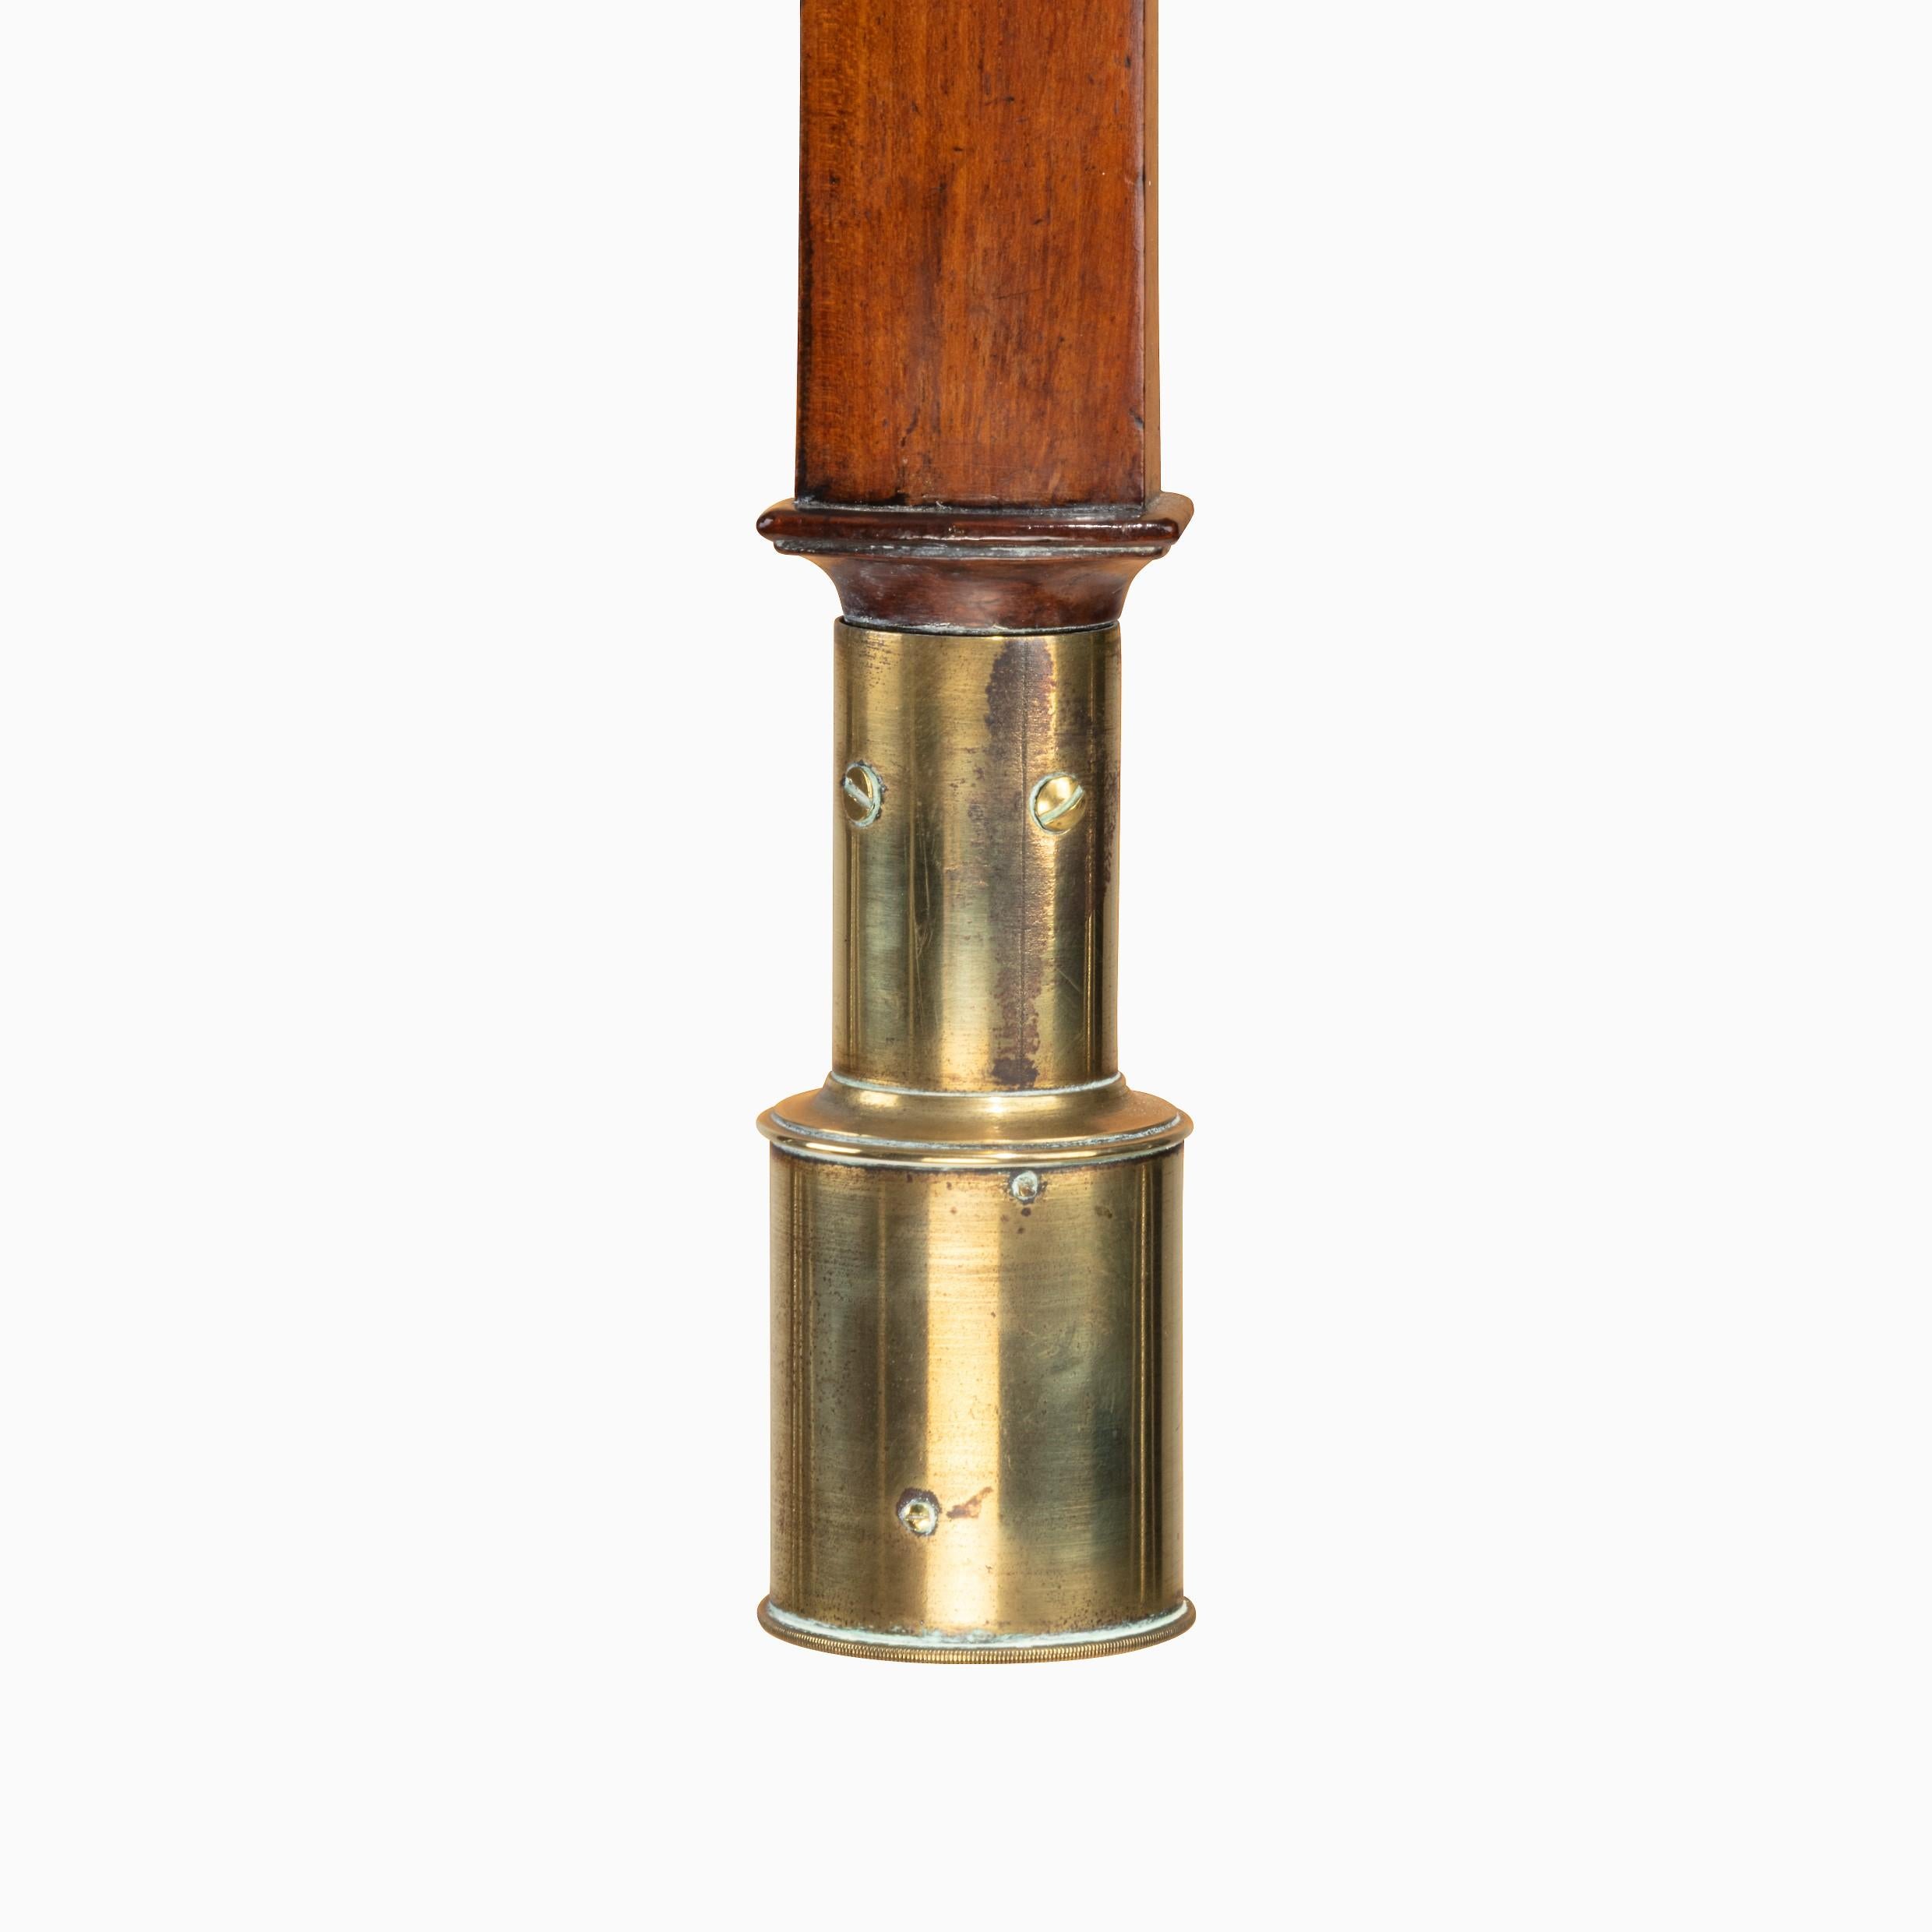 A bow-front marine barometer by John Dollond It is of slender cylindrical form with a silvered register plate enclosed by a hinged thermometer flap and mounted on a plain shaft. The brass gimbal weighted reservoir has pierced sides on the mounting.